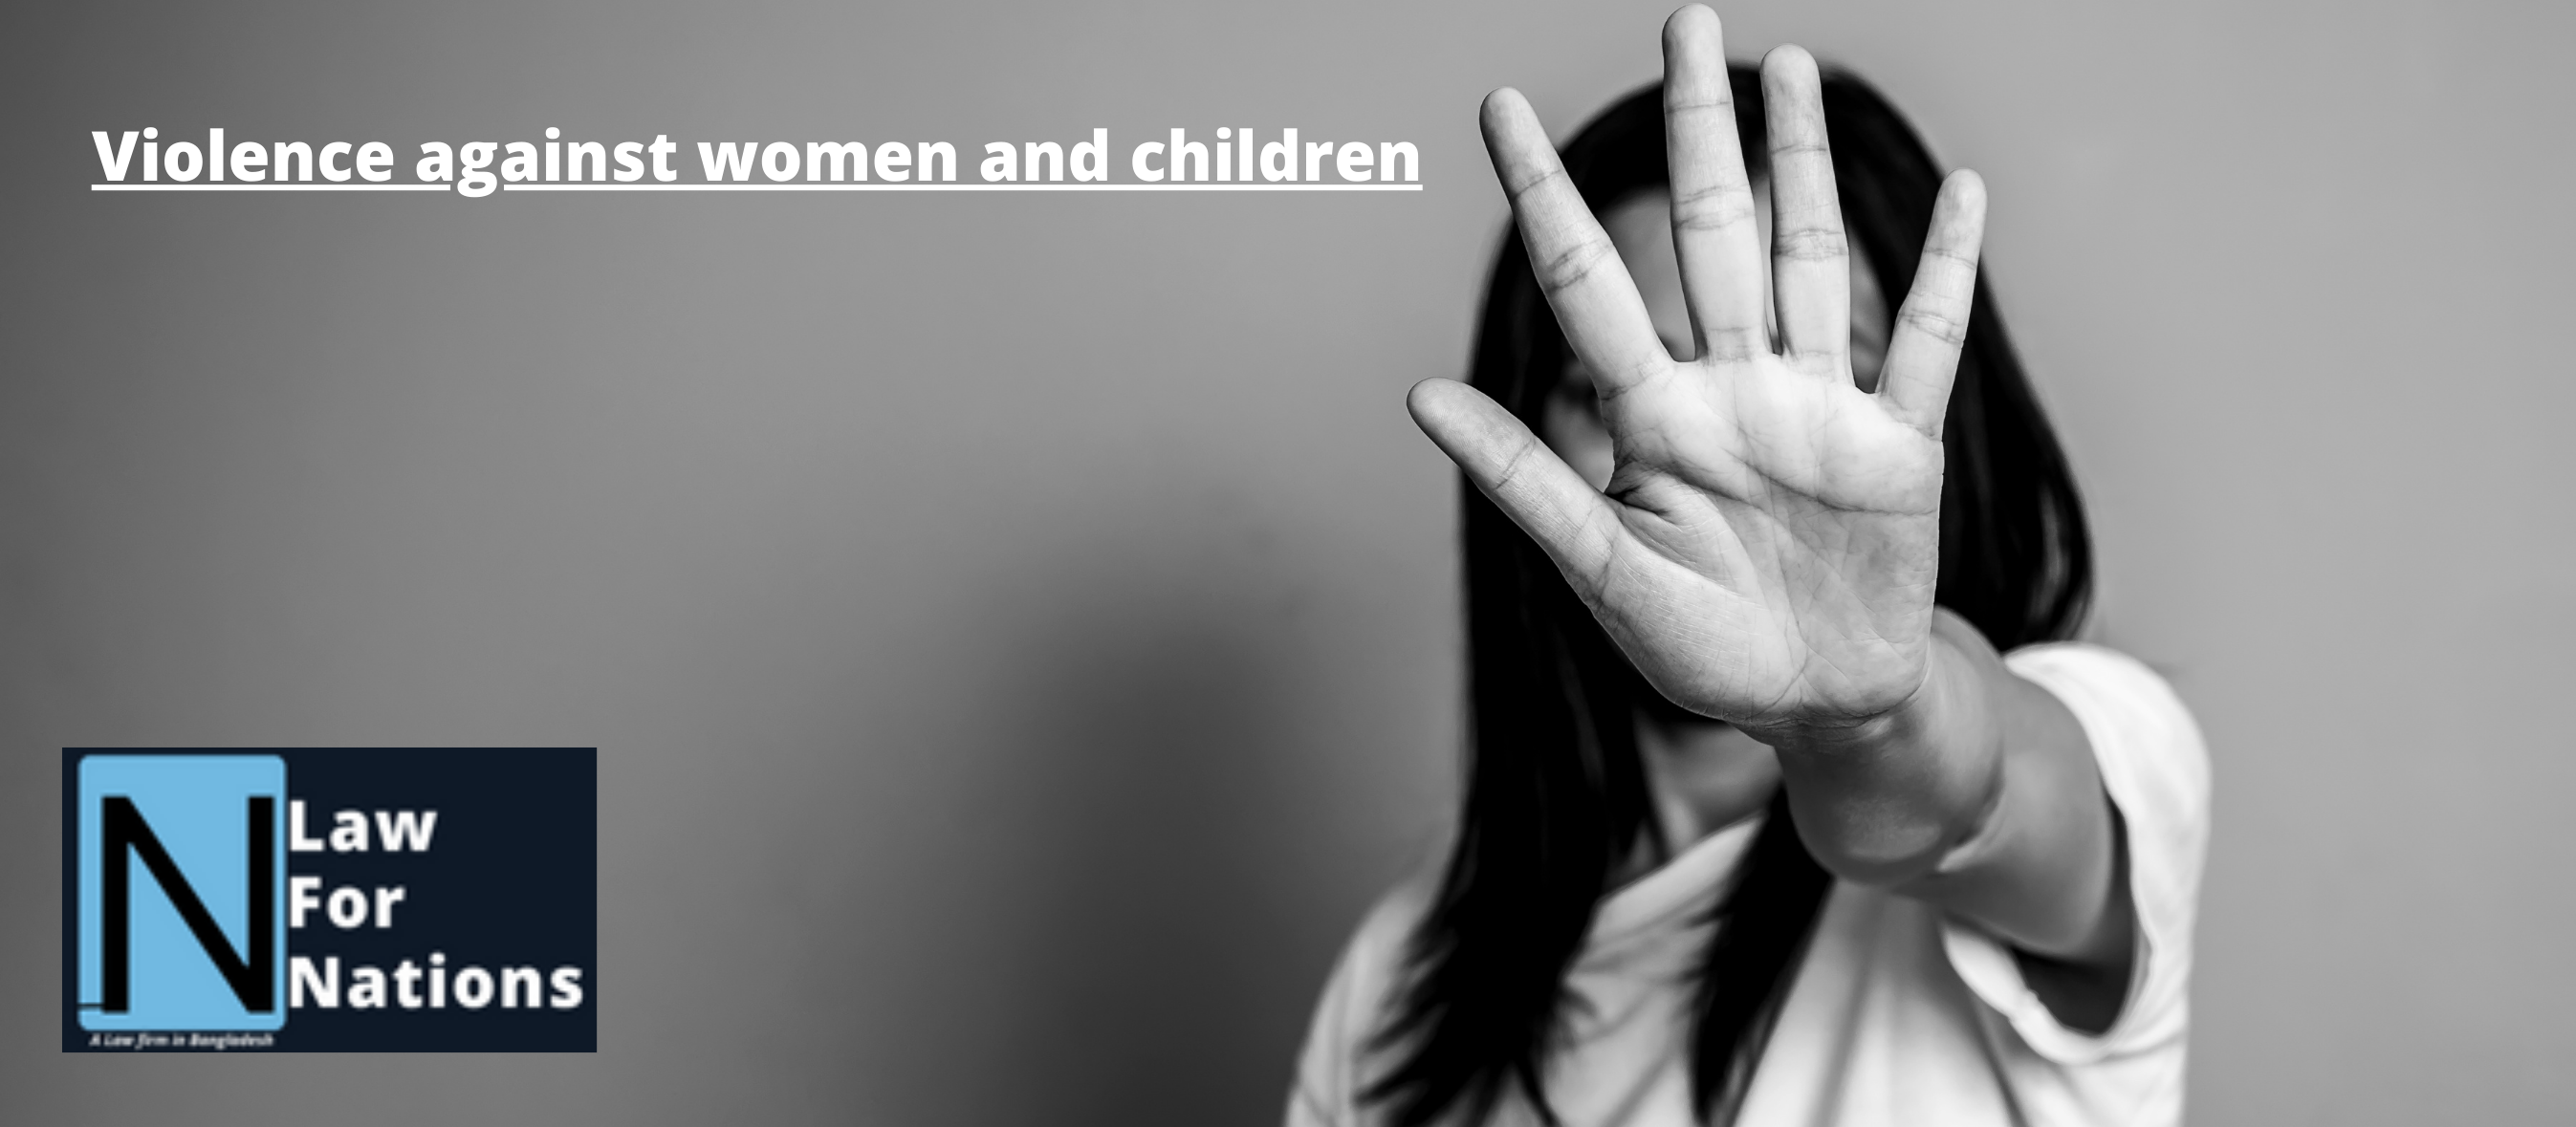 Violence against women and children